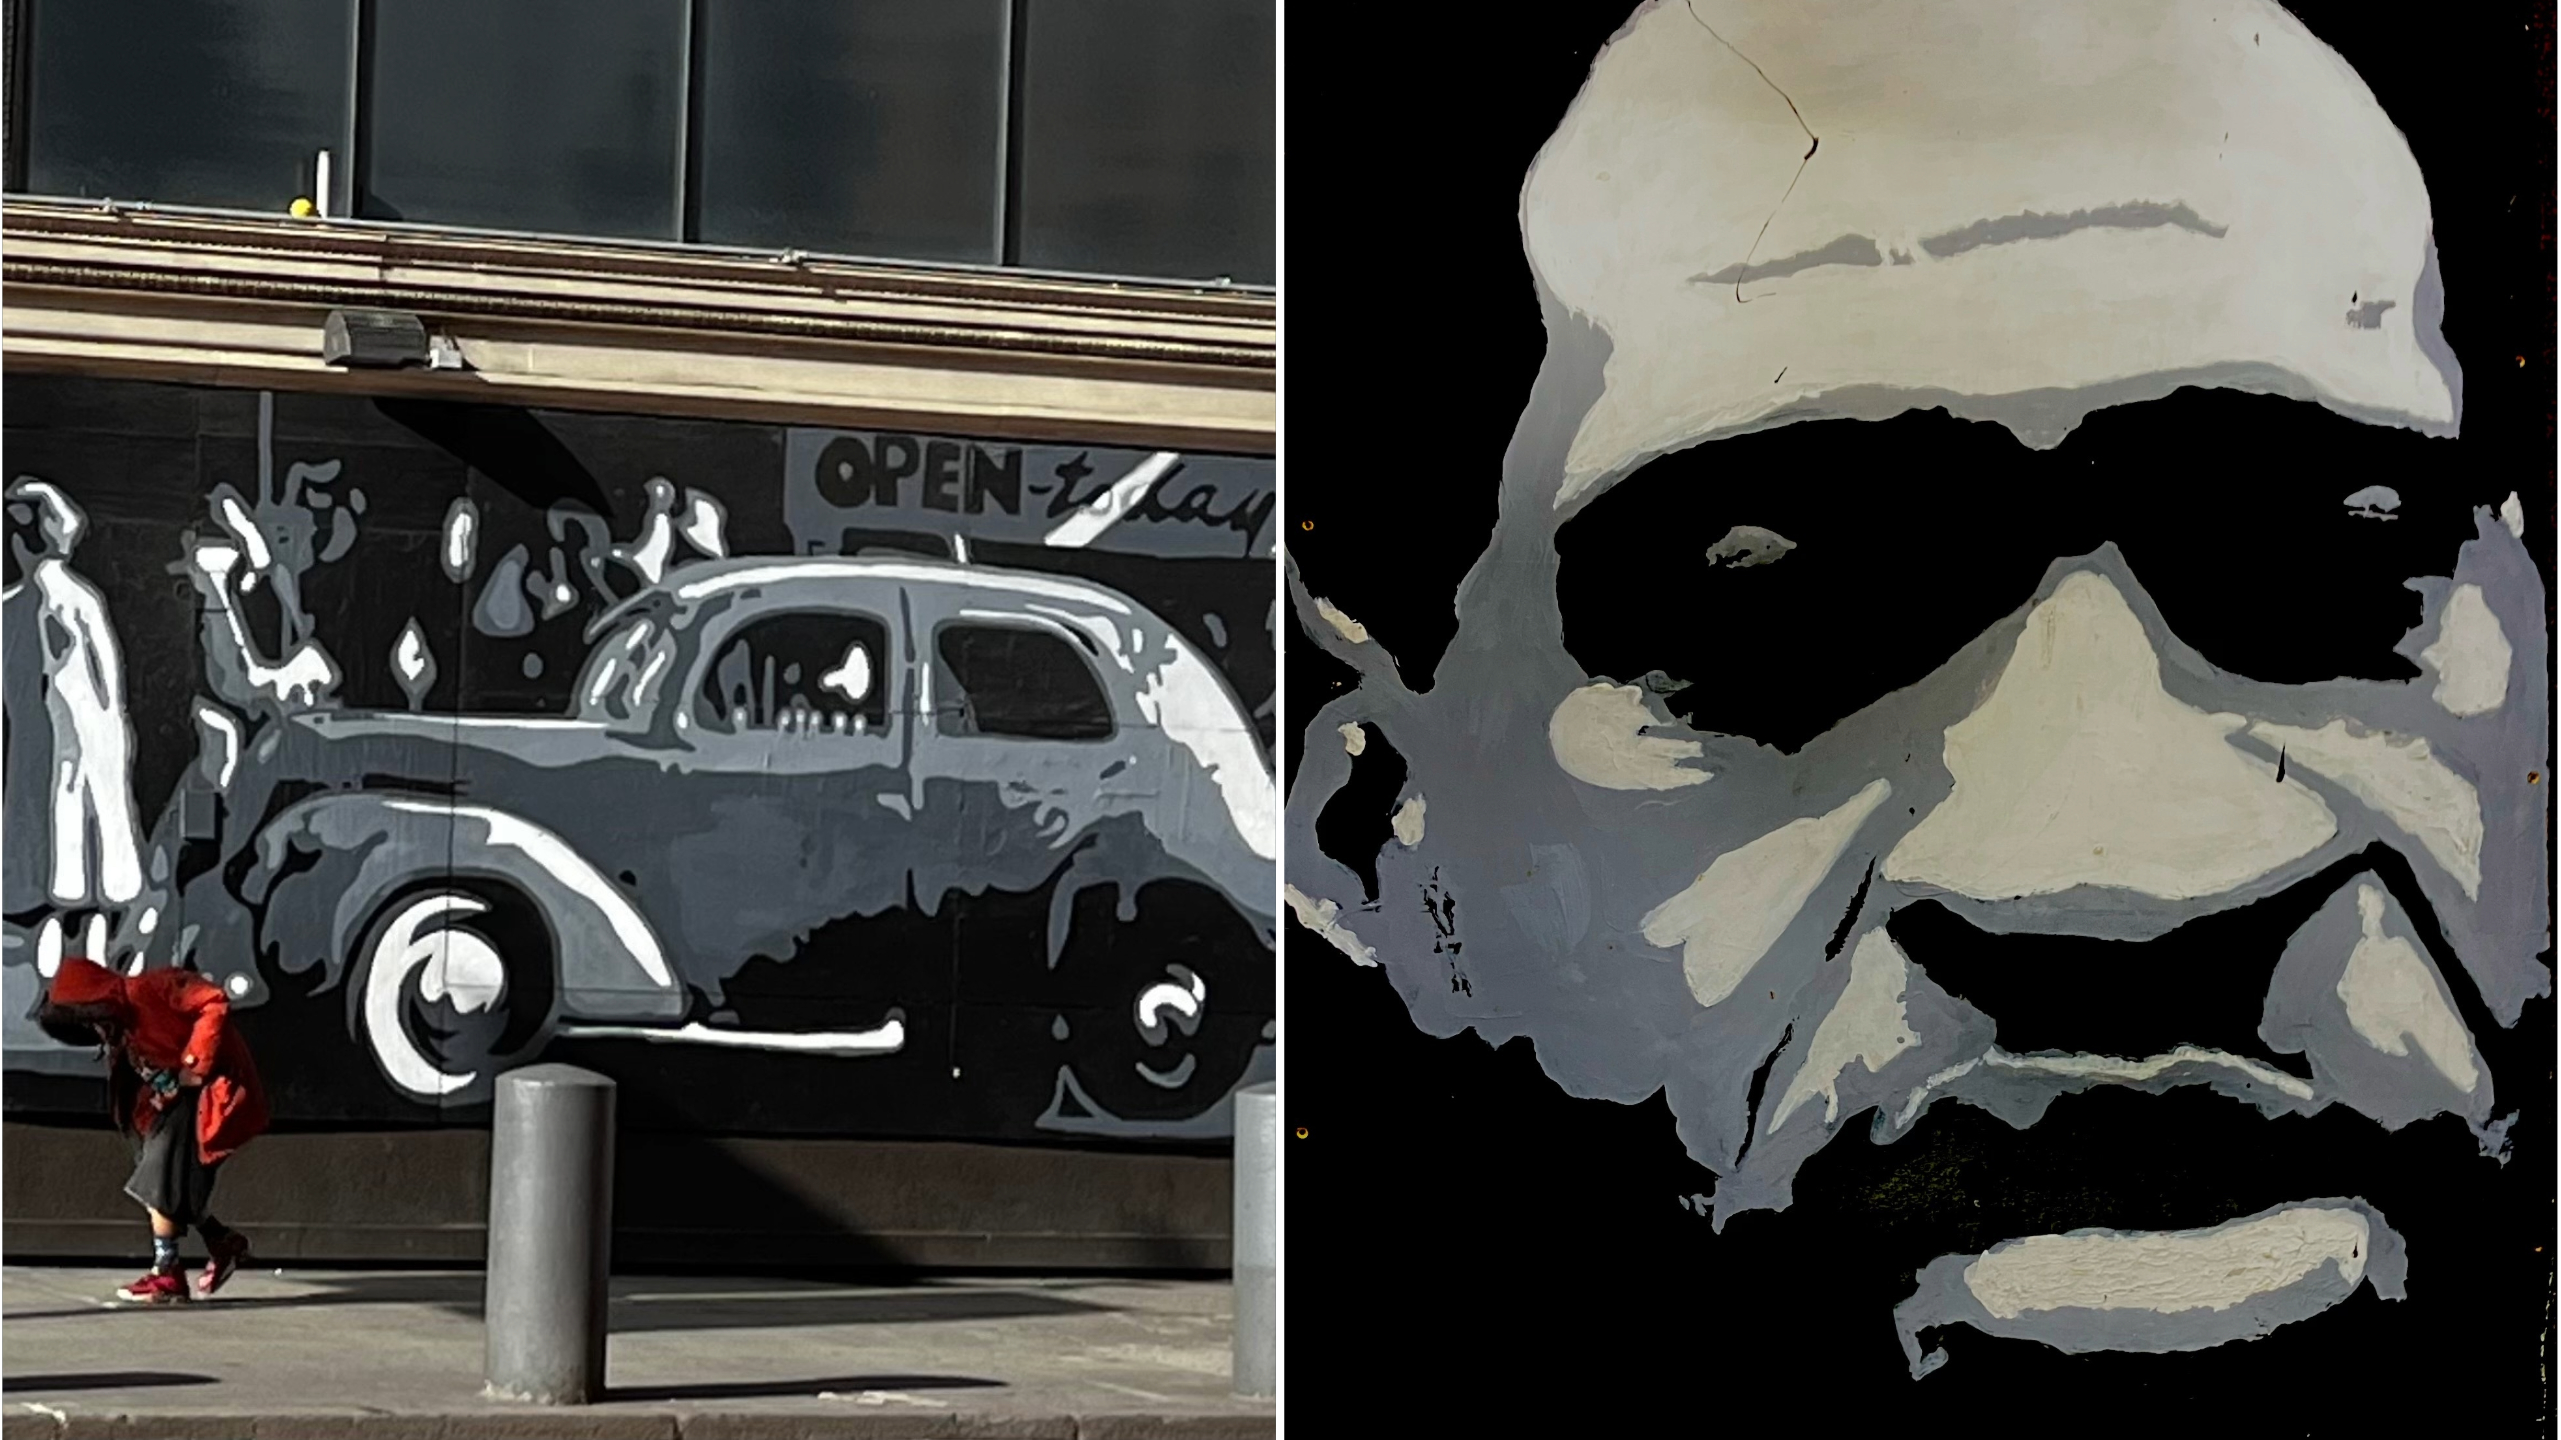 A mural of a vintage car and people with a real person in red mimicking a figure; a stylized painting resembling a face.